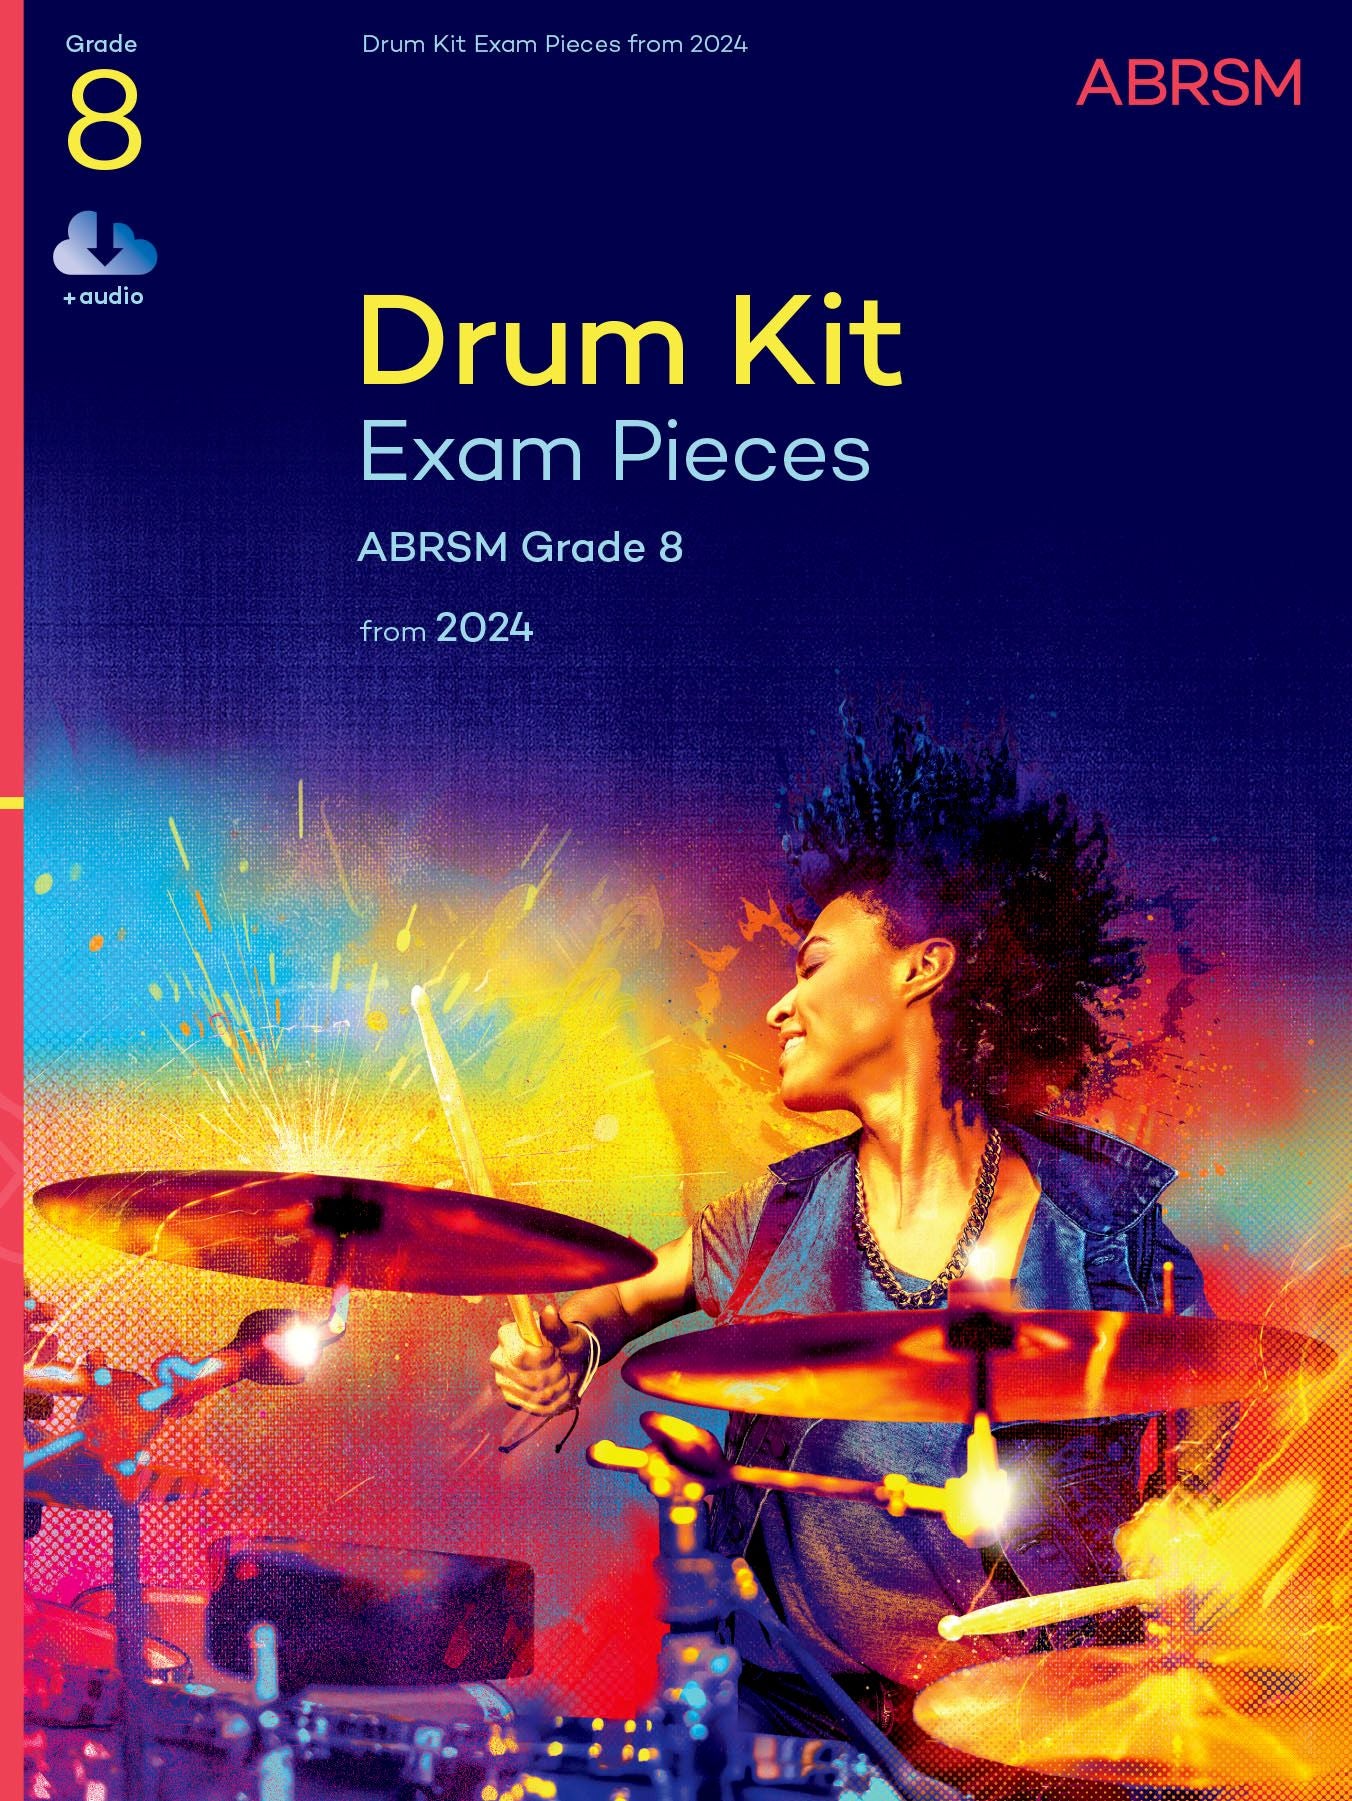 ABRSM Drum Kit Exam Pieces Grade 8 from 2024 (w/ Audio)